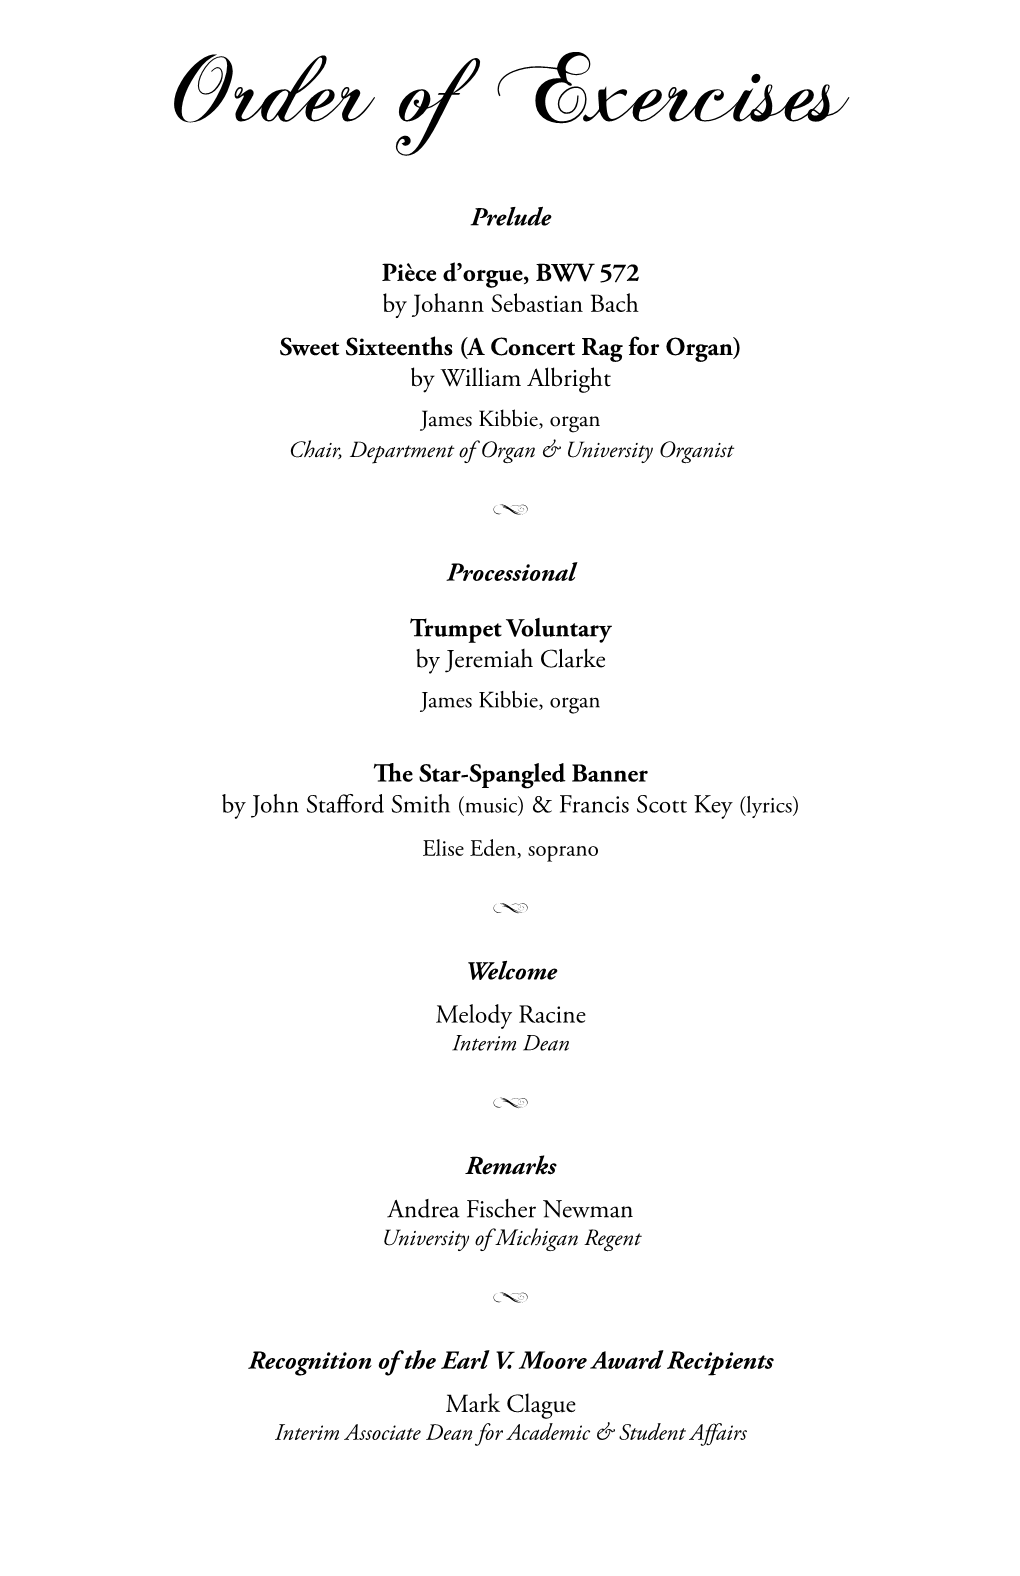 View the Program for This Ceremony (PDF)